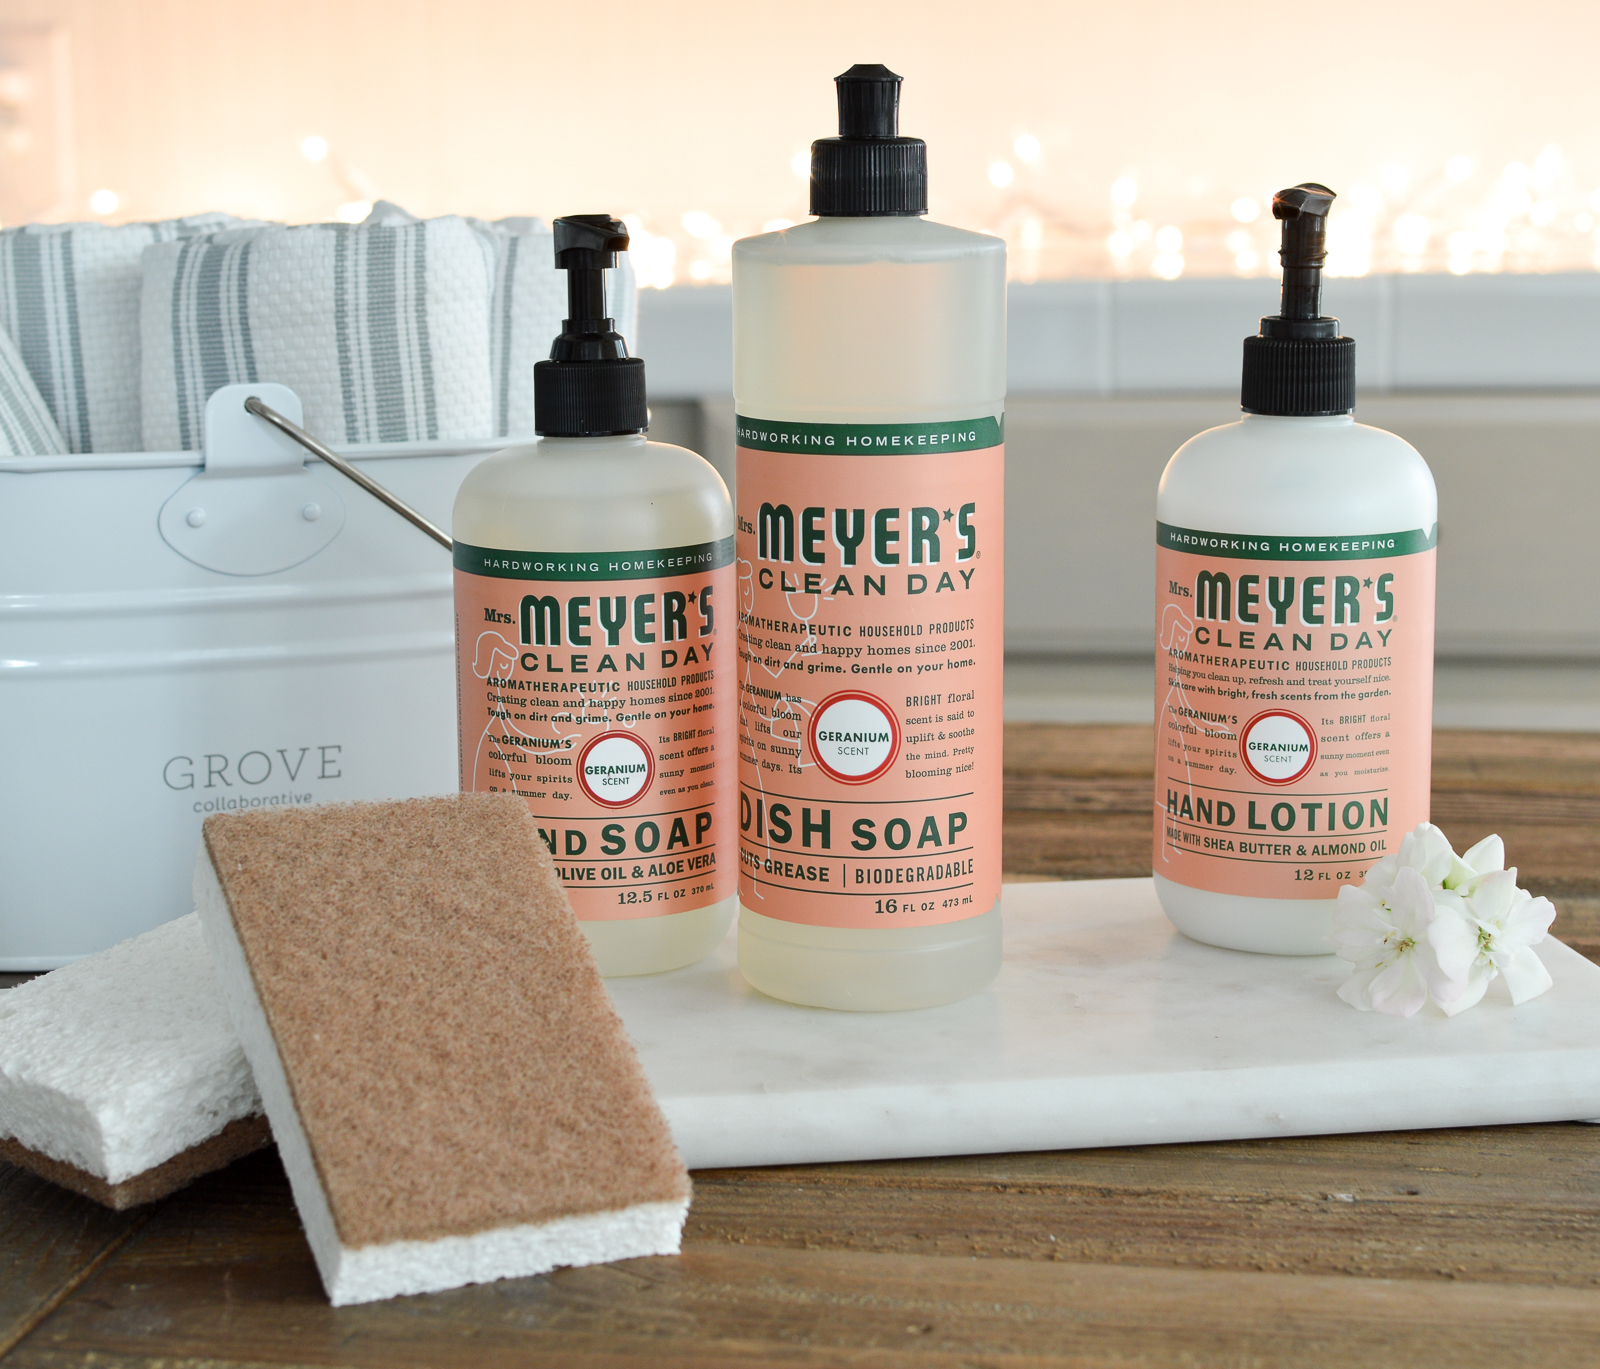 FREE Mrs Meyers Organizing Cleaning Caddy Set - DETAILS at www.foxhollowcottage.com #ad